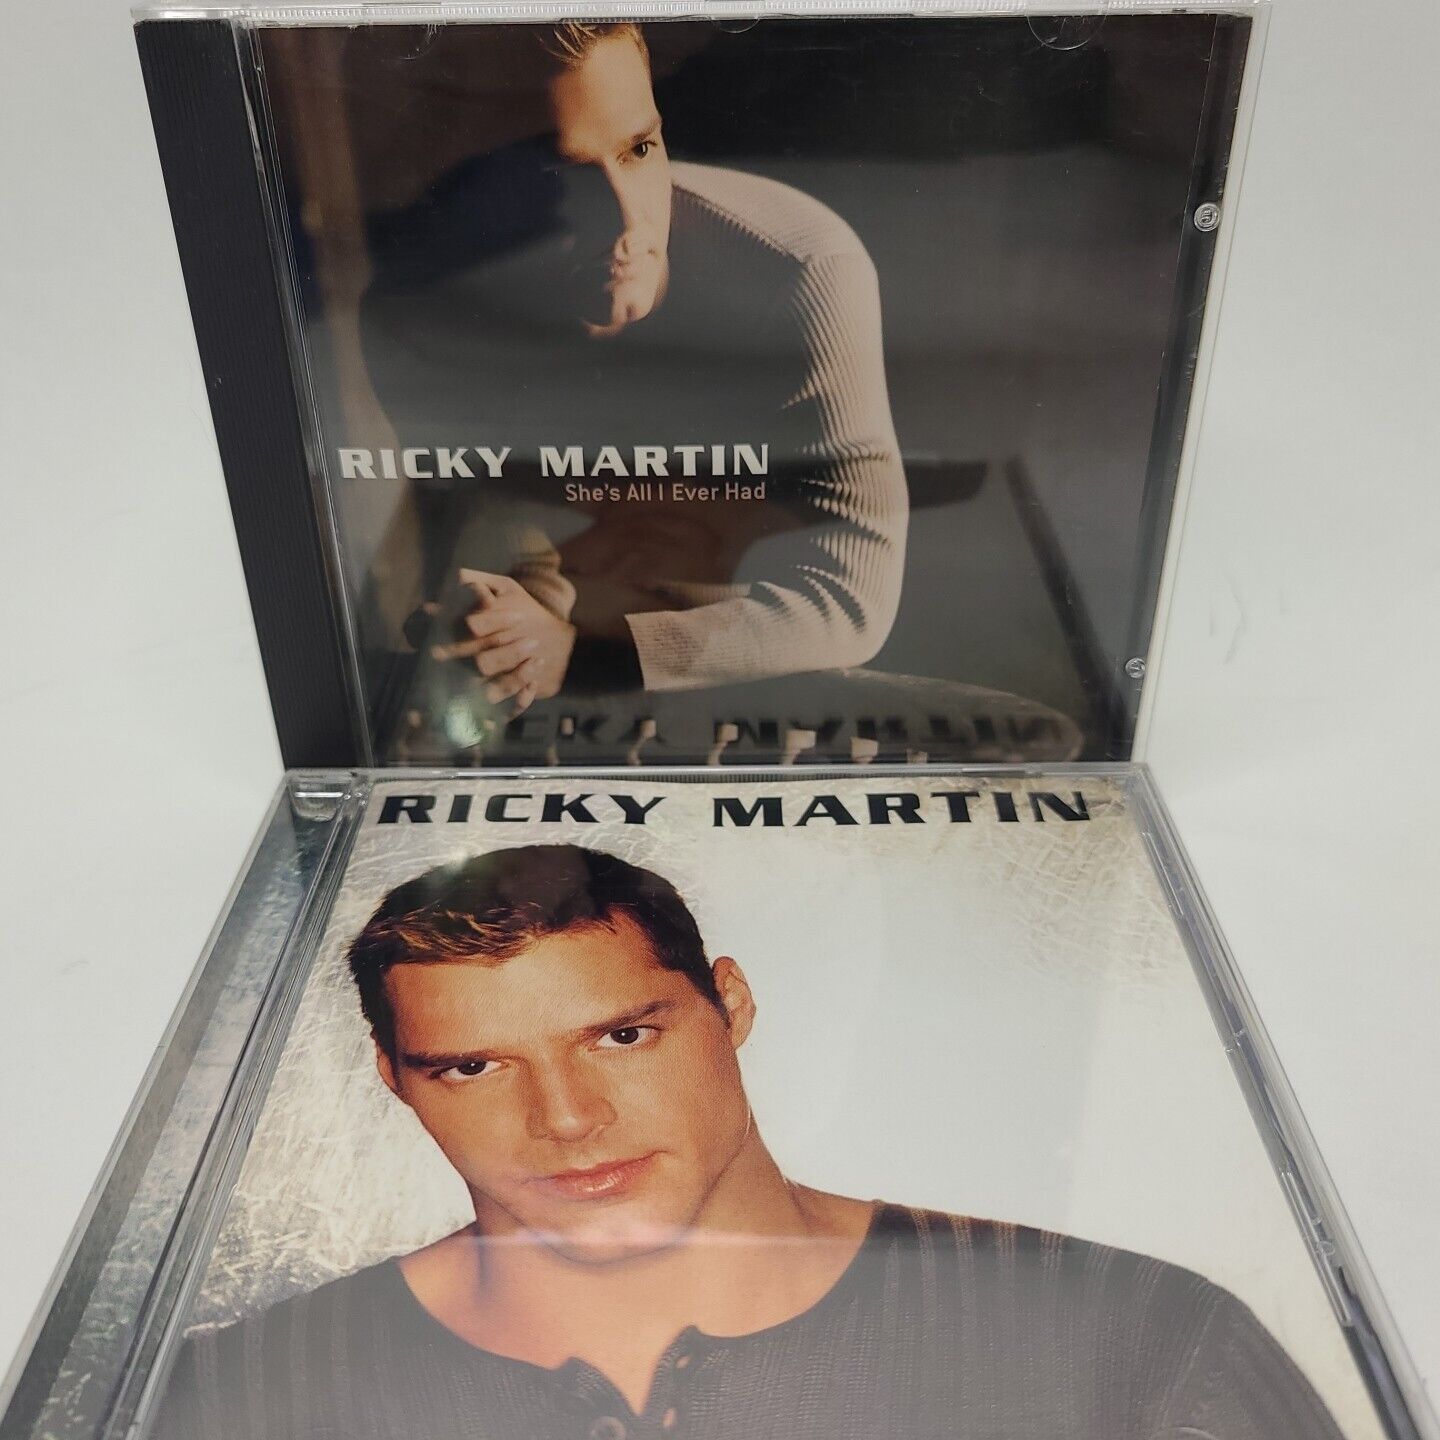 Ricky Martin ​CD Lot of 2 - She's All I Ever Had & Self-Titled VERY GOOD